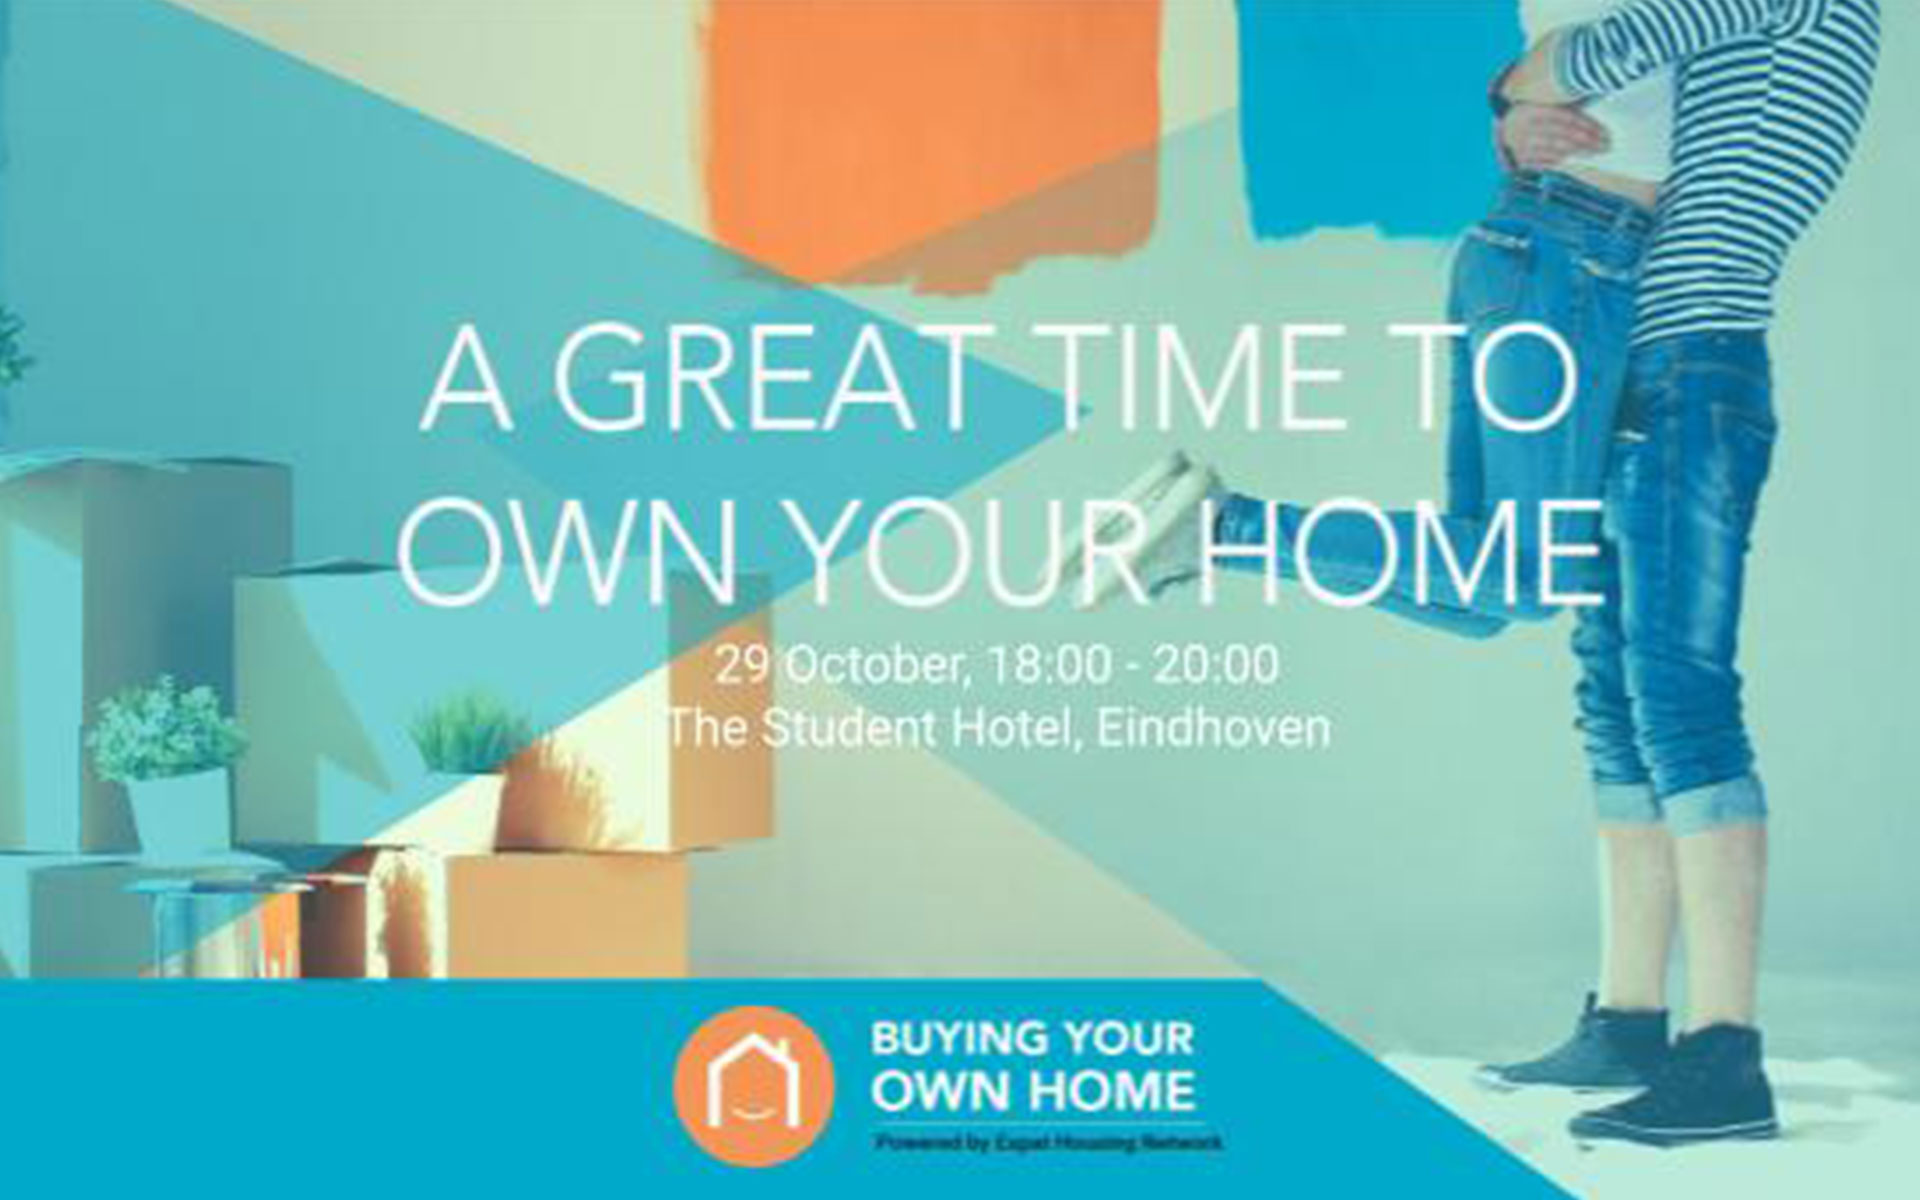 Buying Your own home in Eindhoven-Oct 29